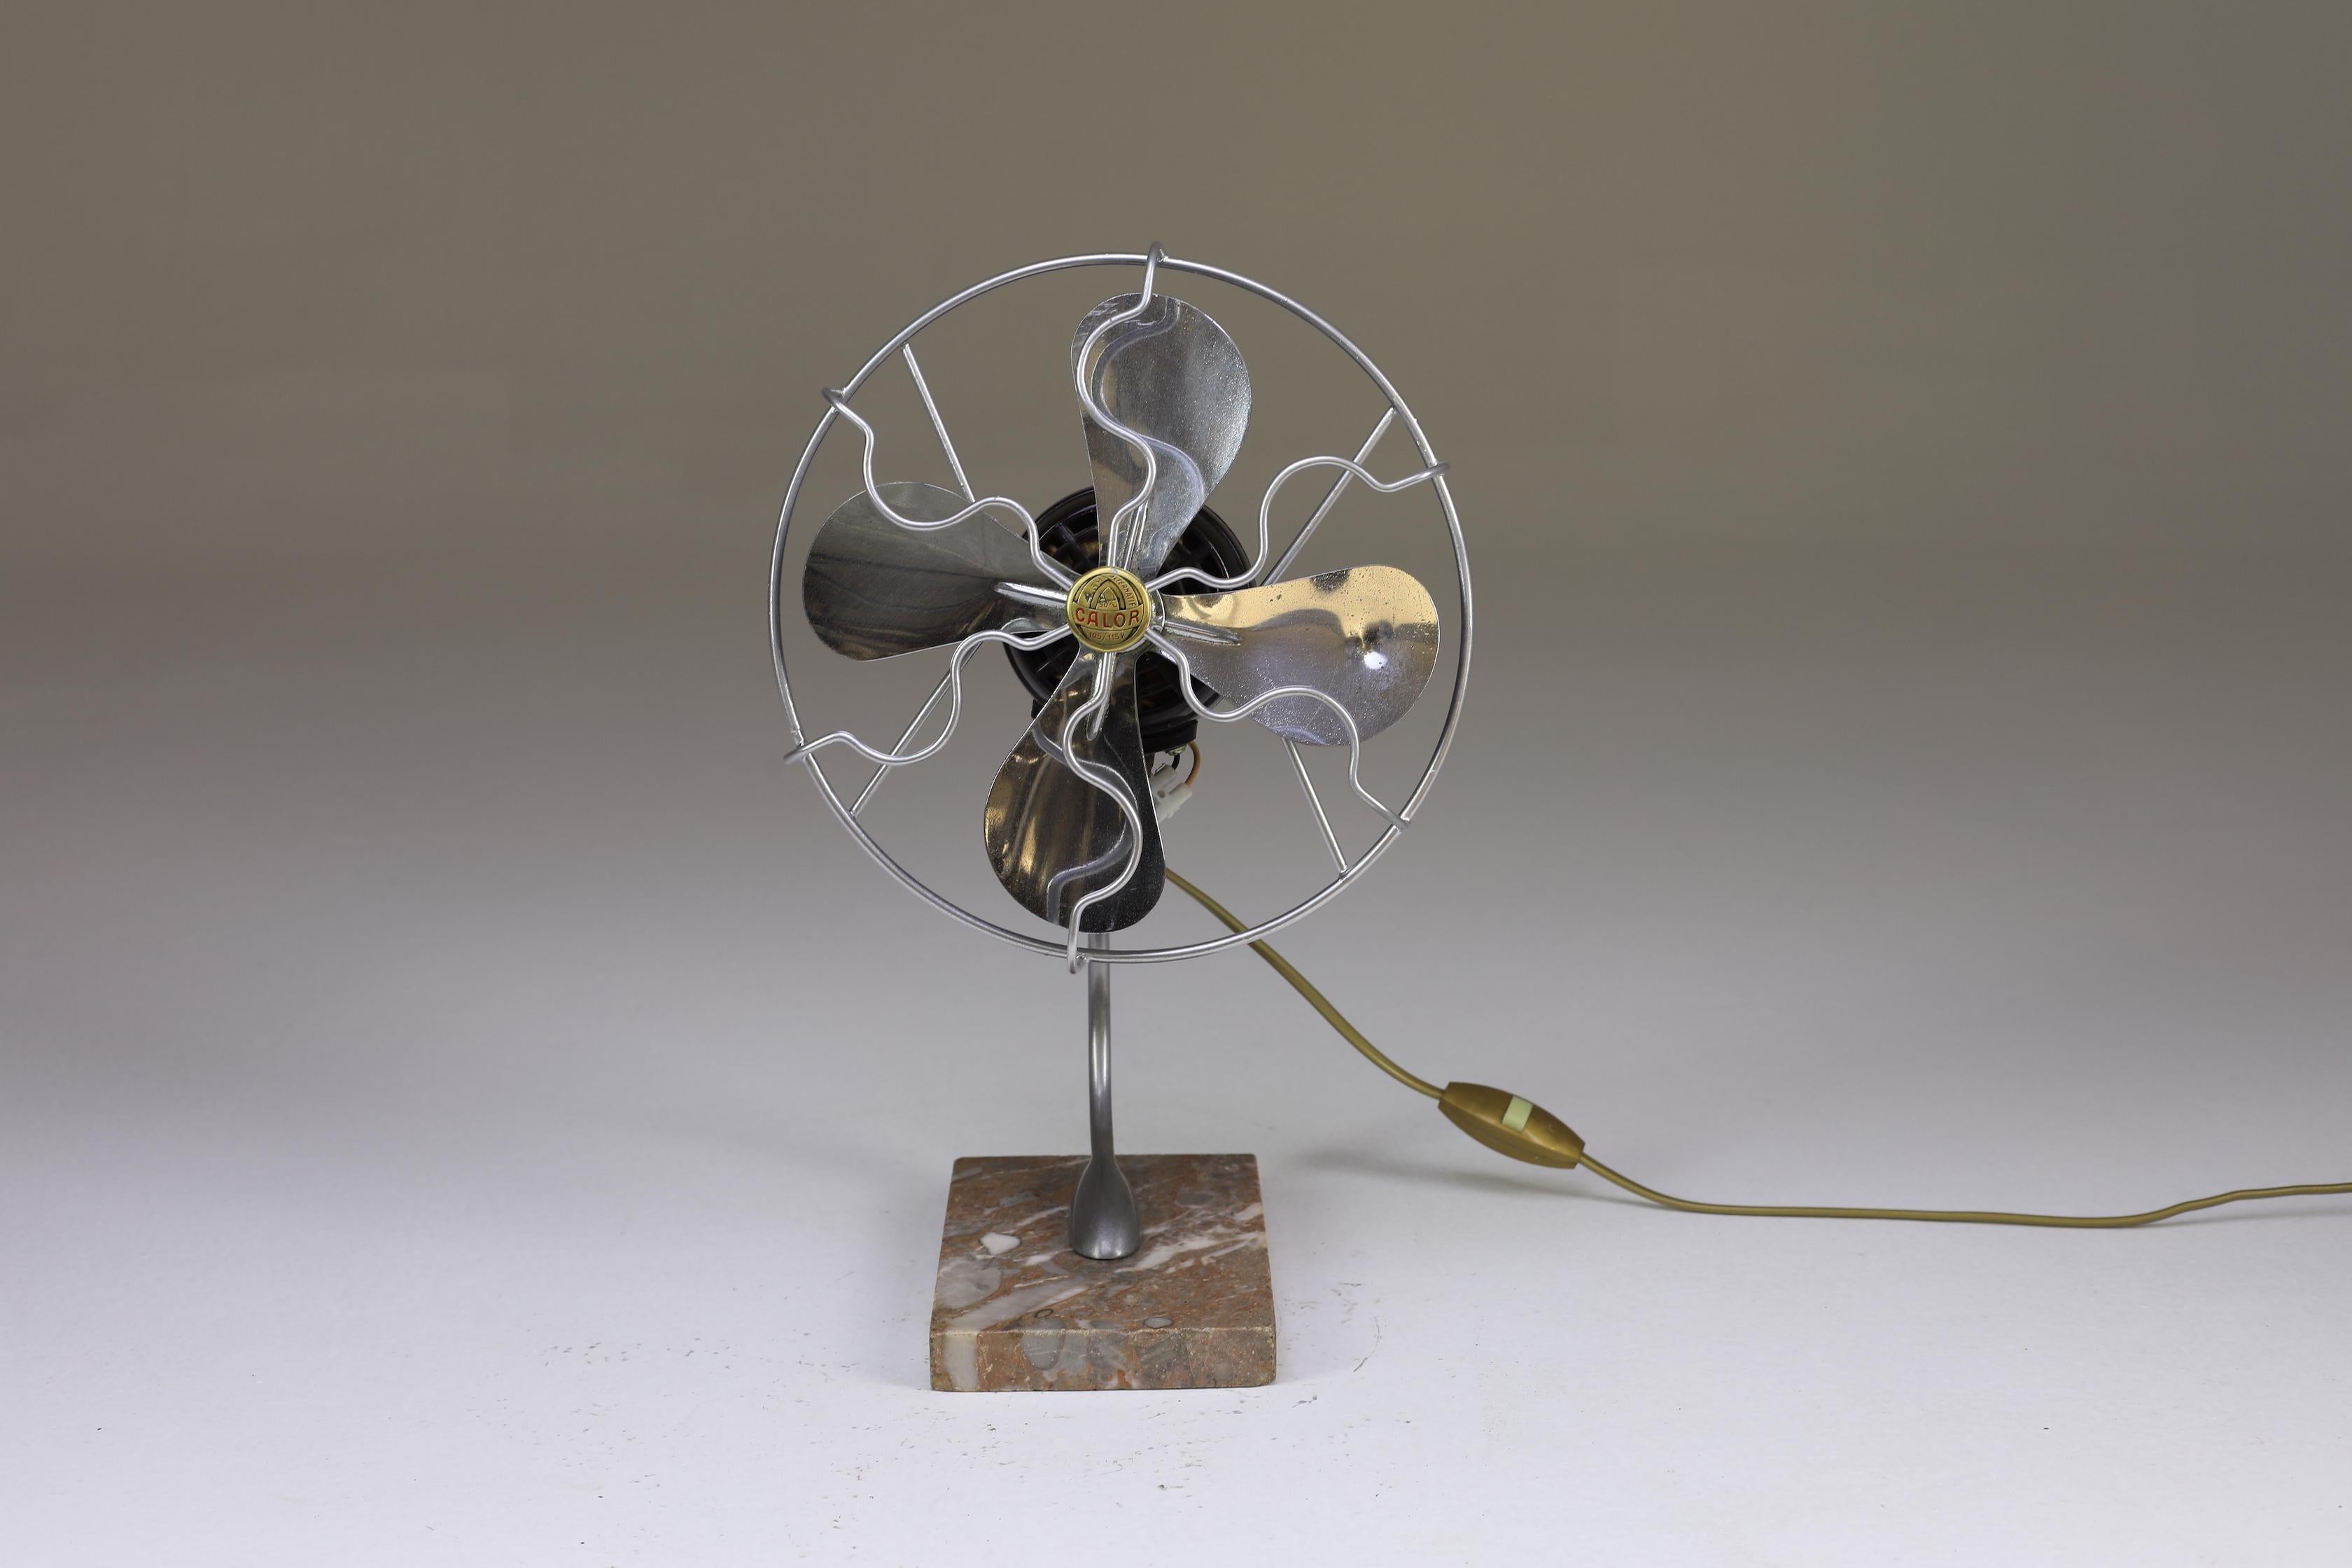 A fully functional restored small ventilator from the early 1940s. This interesting design that sits on a beautiful marble base is as much decorative as it is functional. It is rare to find a piece like this in such good condition. It works on